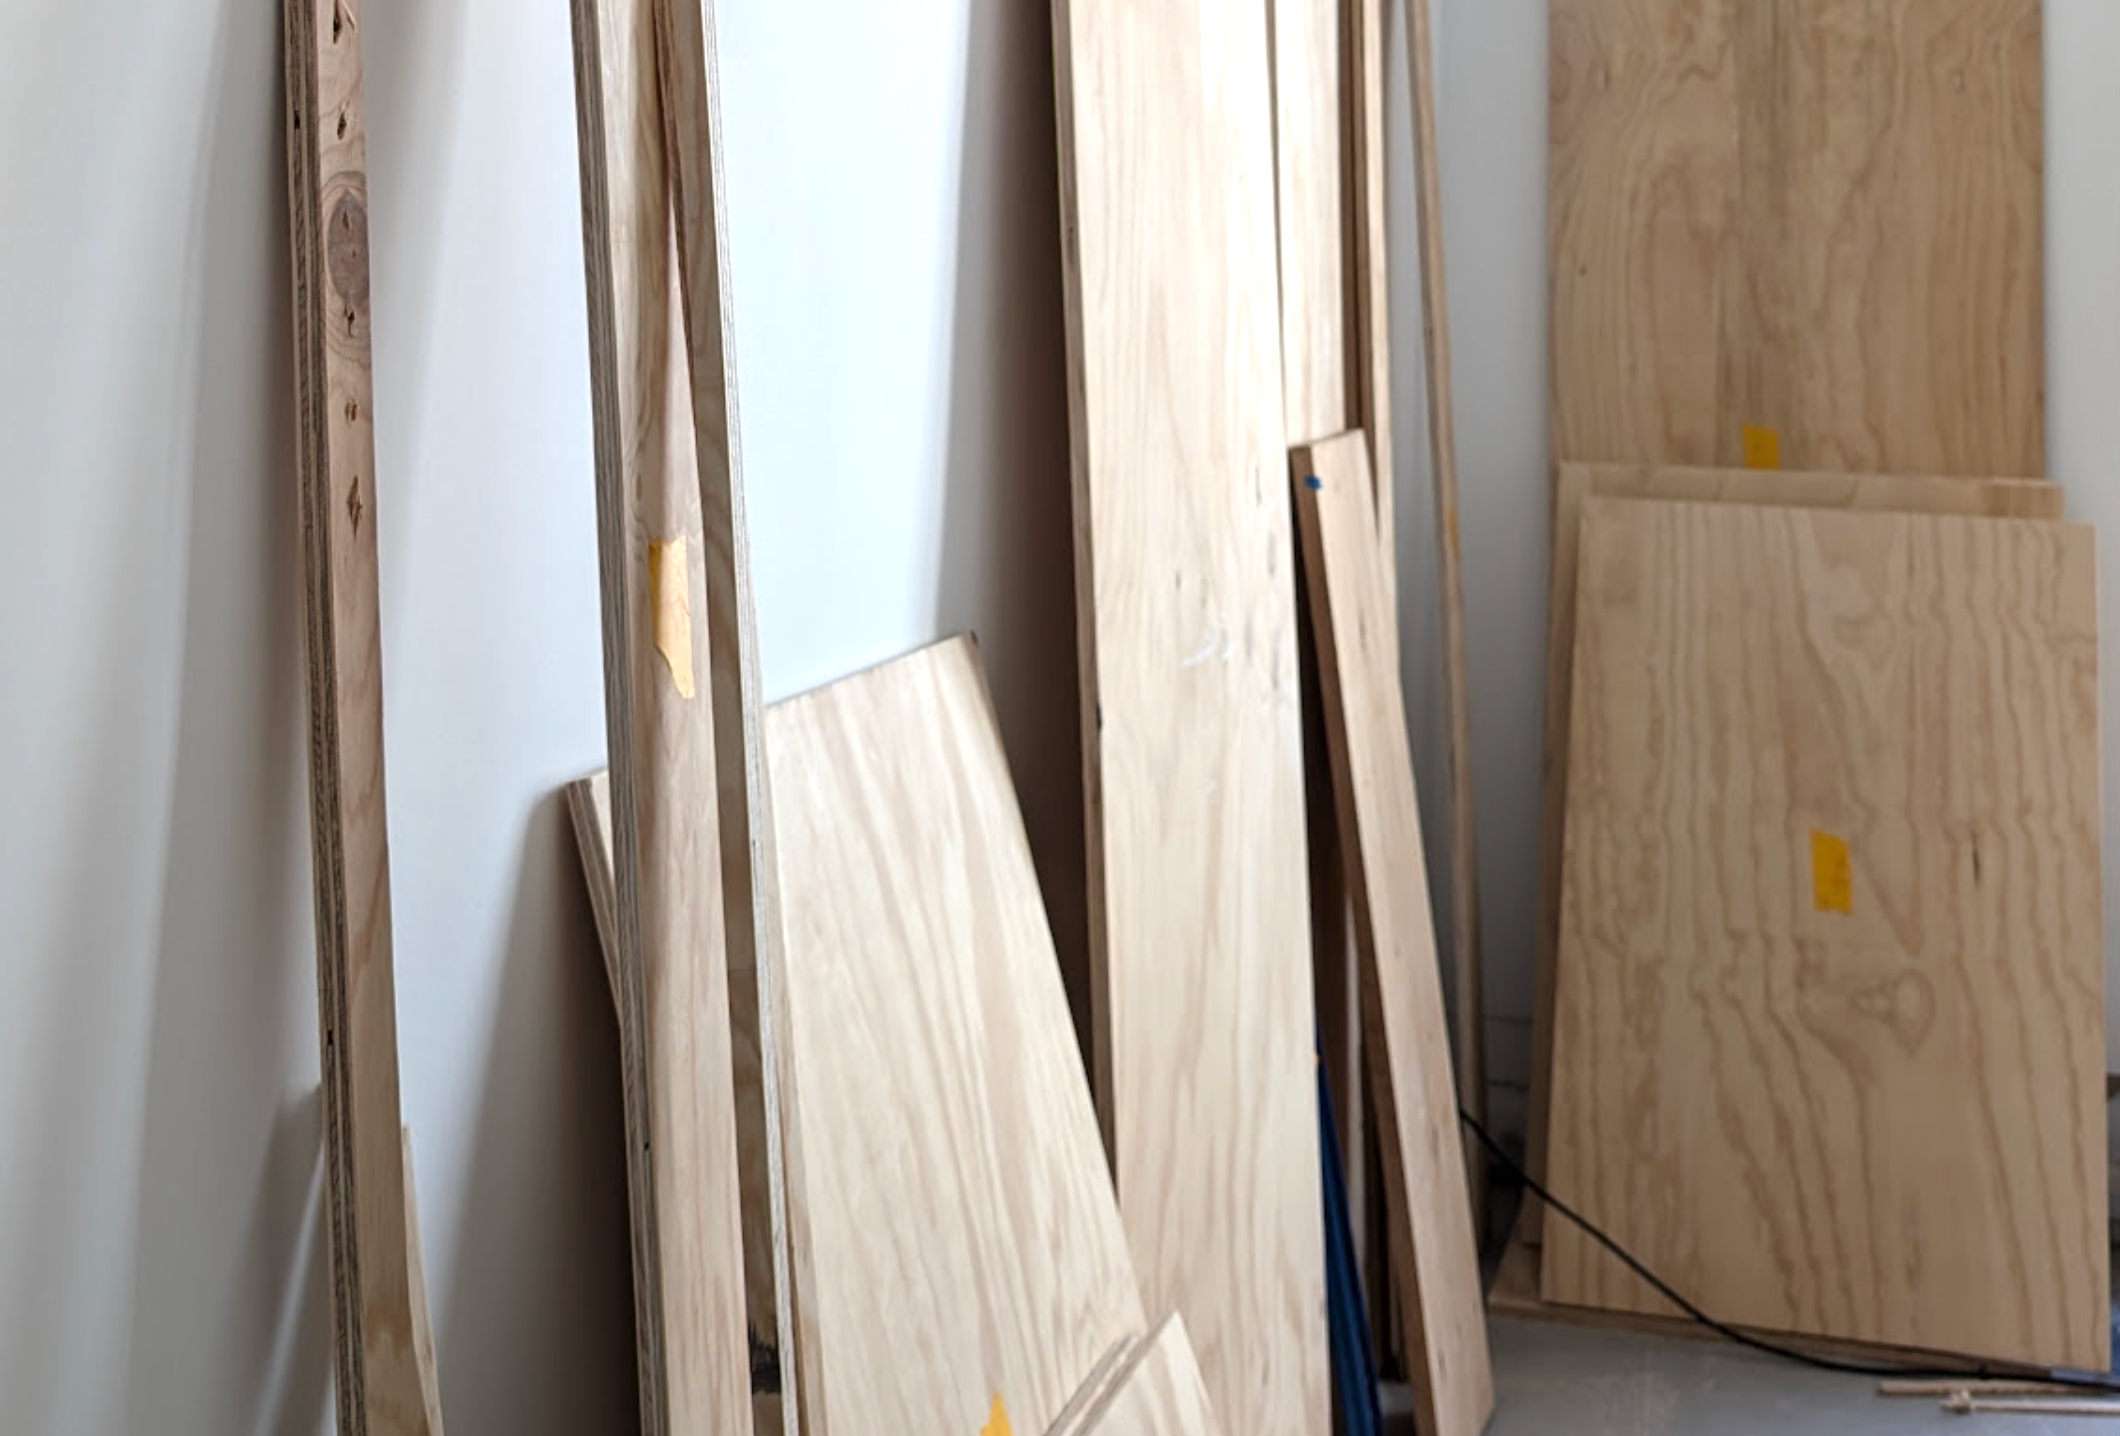 A small fraction of my plywood panel bounty.